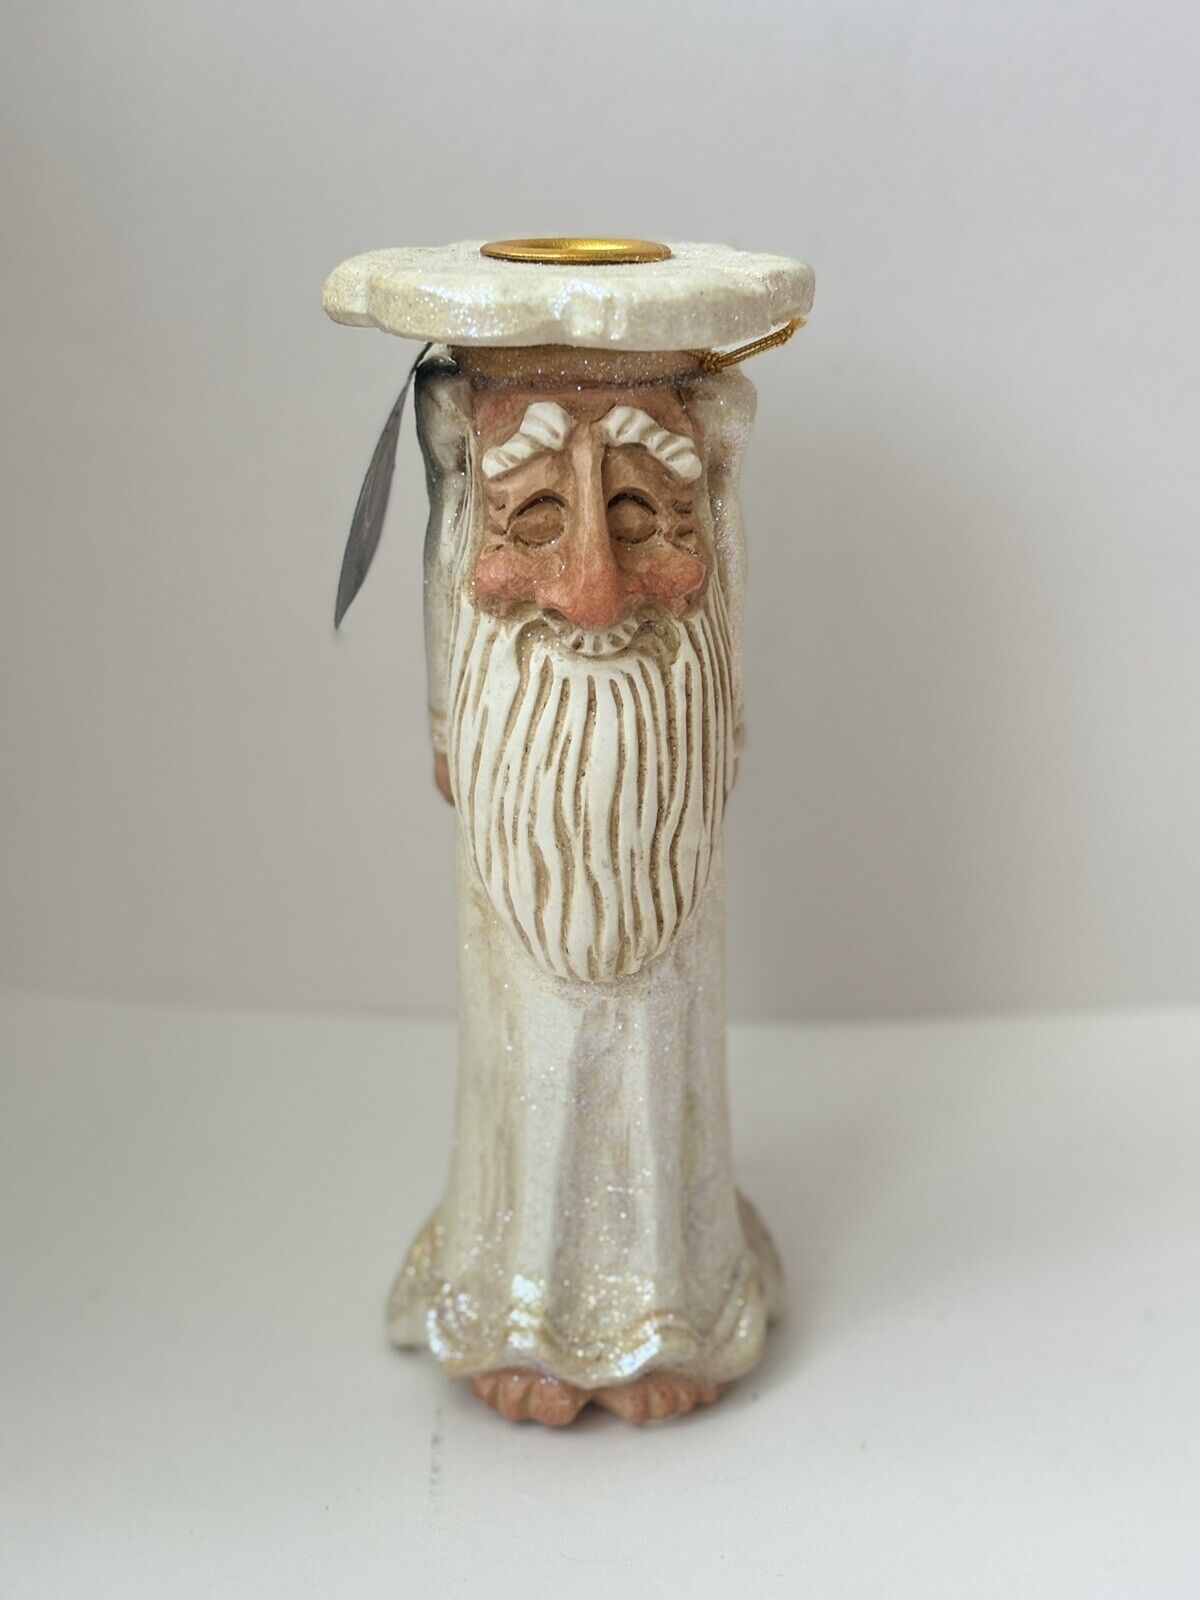 David Frykman VTG Candle Holder “All That Glitters Too” 7” Figurine